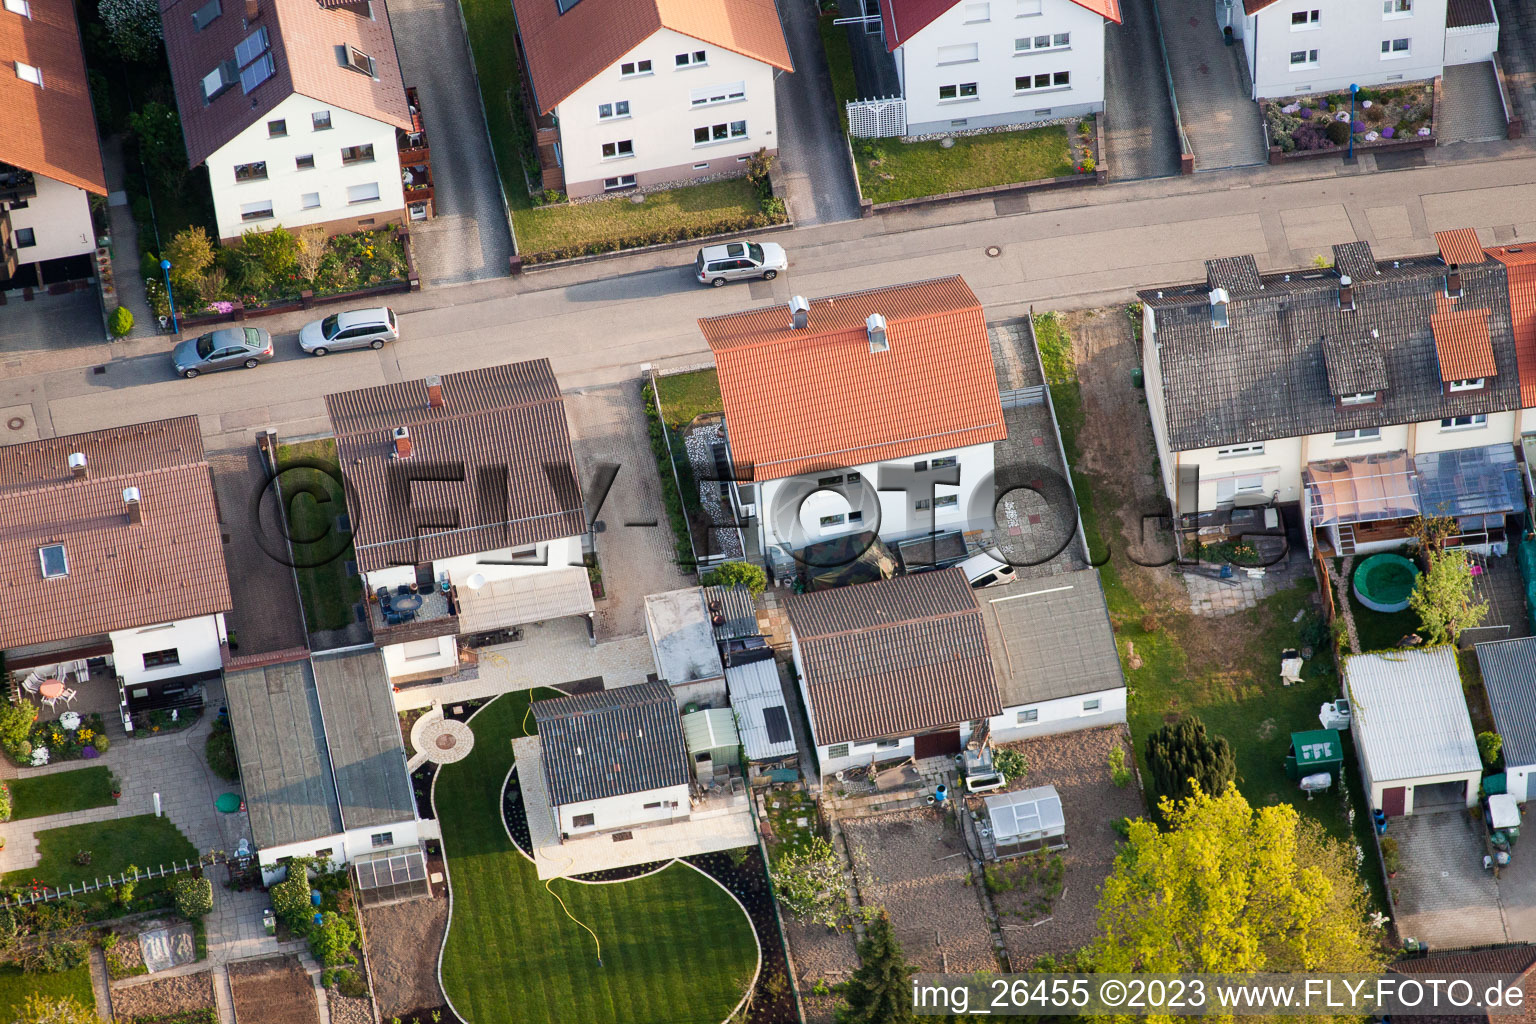 Home gardens on Rosenstr in the district Reichenbach in Waldbronn in the state Baden-Wuerttemberg, Germany seen from above